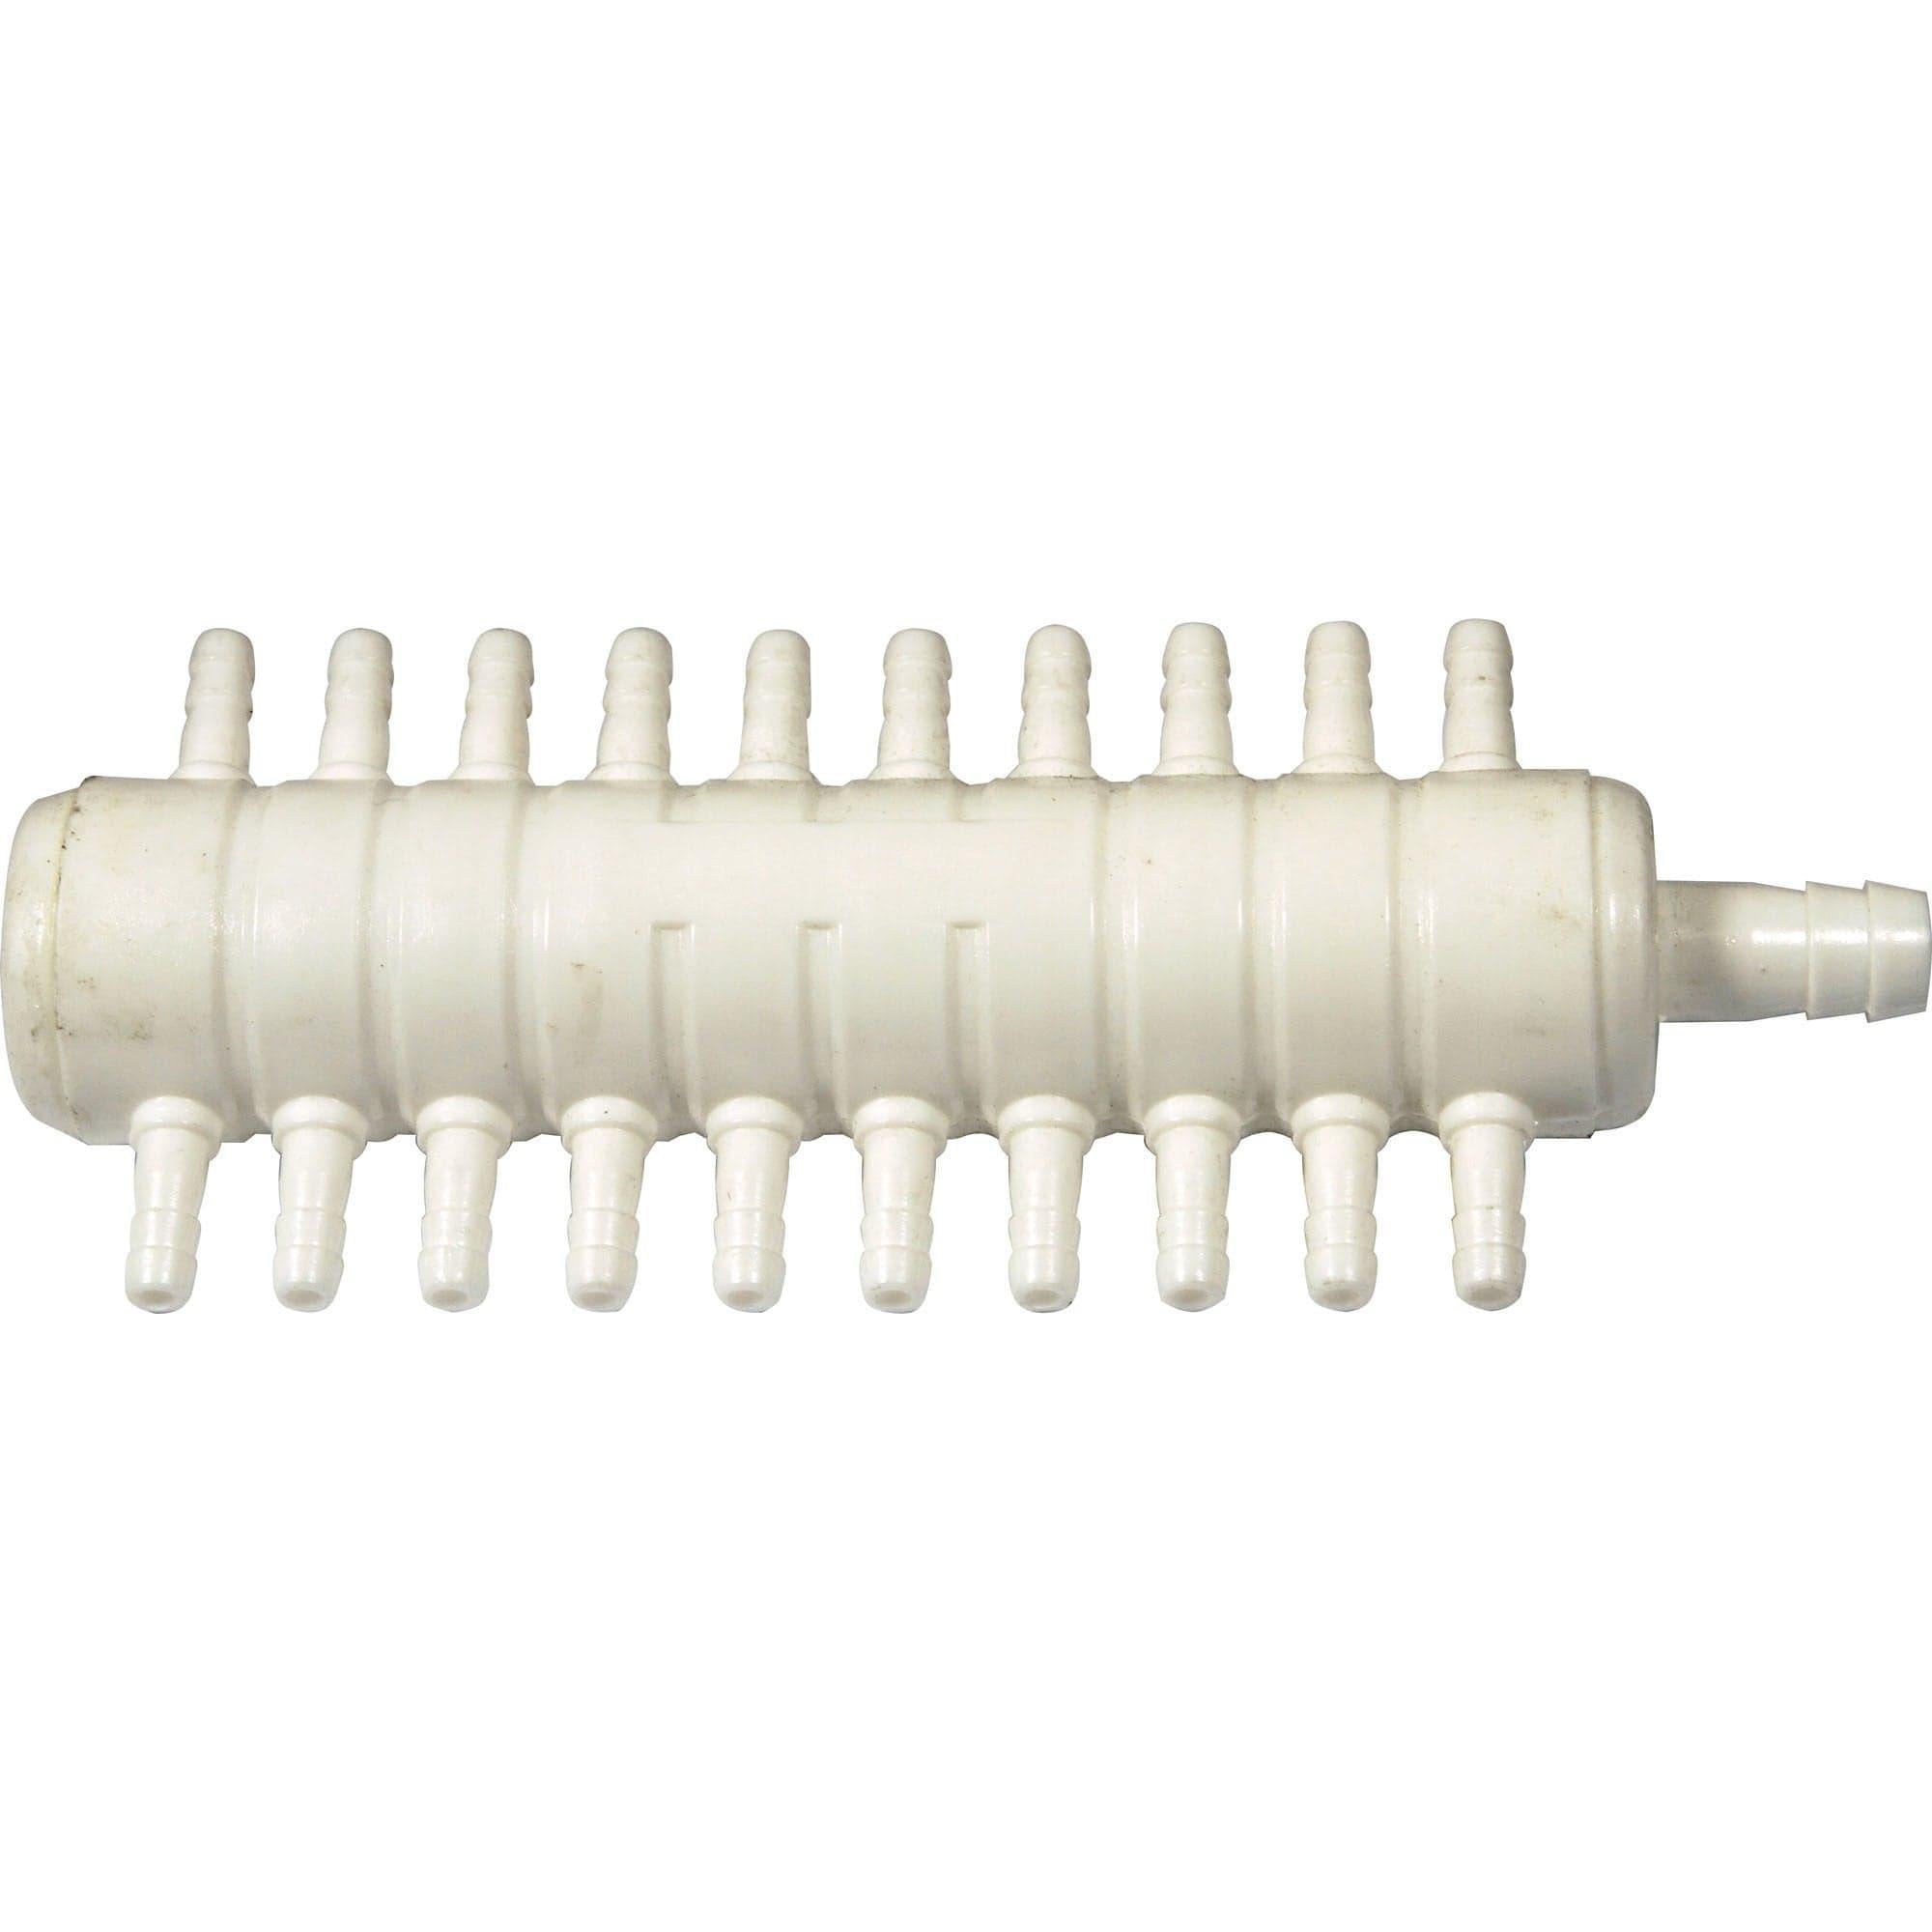 Pipes, Hoses & Fittings Hailea Plastic Air or Nutrient Manifolds